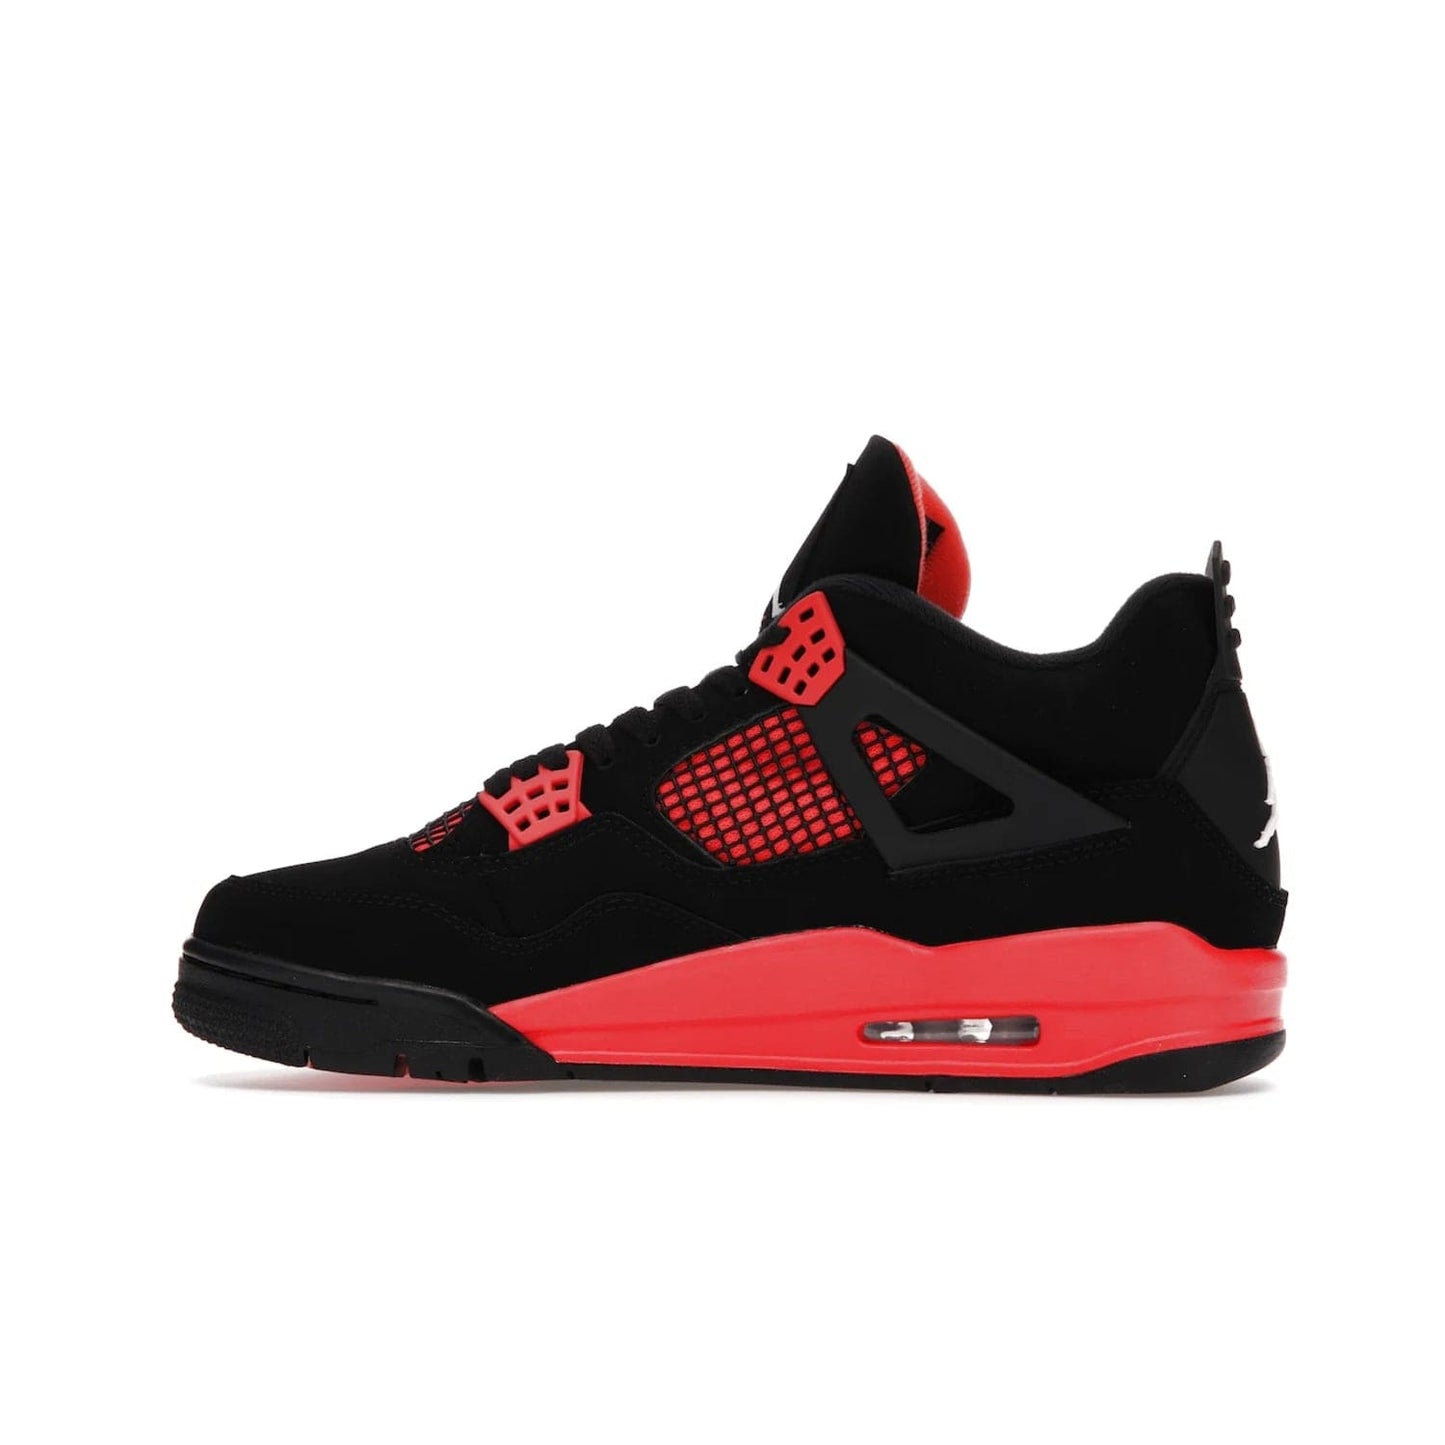 Jordan 4 Retro Red Thunder - Image 20 - Only at www.BallersClubKickz.com - Upscale your footwear with the Air Jordan 4 Retro Red Thunder. Featuring a Durabuck upper, red underlays, signature Flight patch, and vibrant red midsole, this retro sneaker adds style and edge. Releases in January 2022.